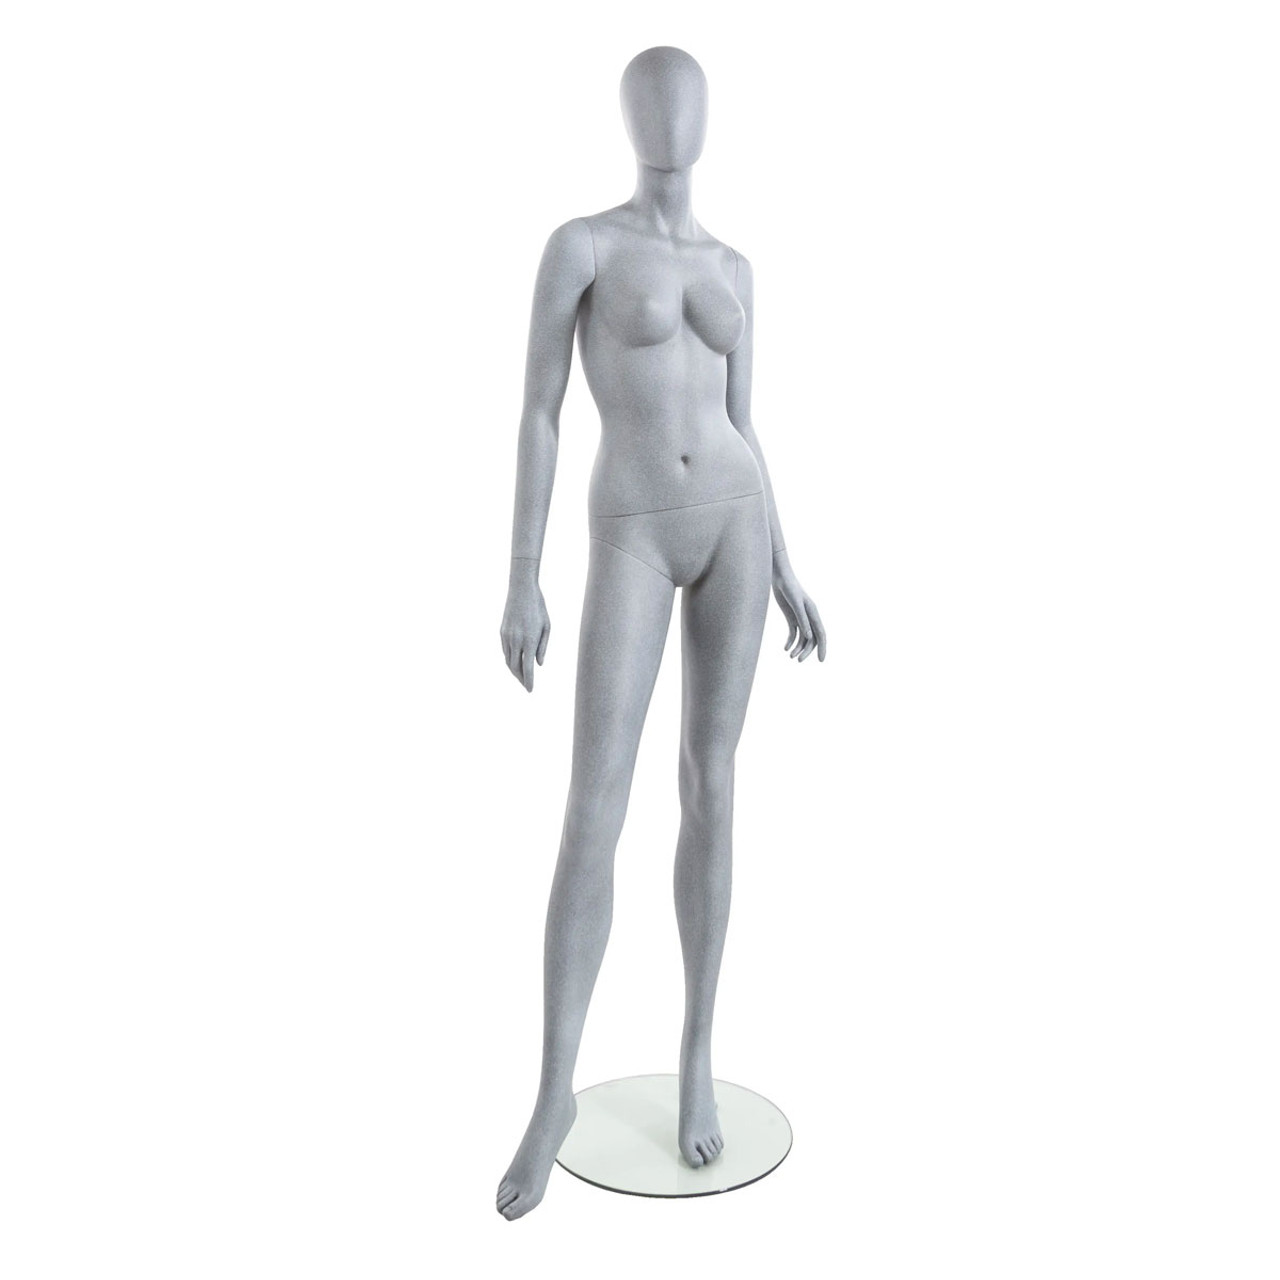 Full Body Yoga The Mannequin 2 For Women Enhance Posture And Performance  From Best138, $262.85 | DHgate.Com